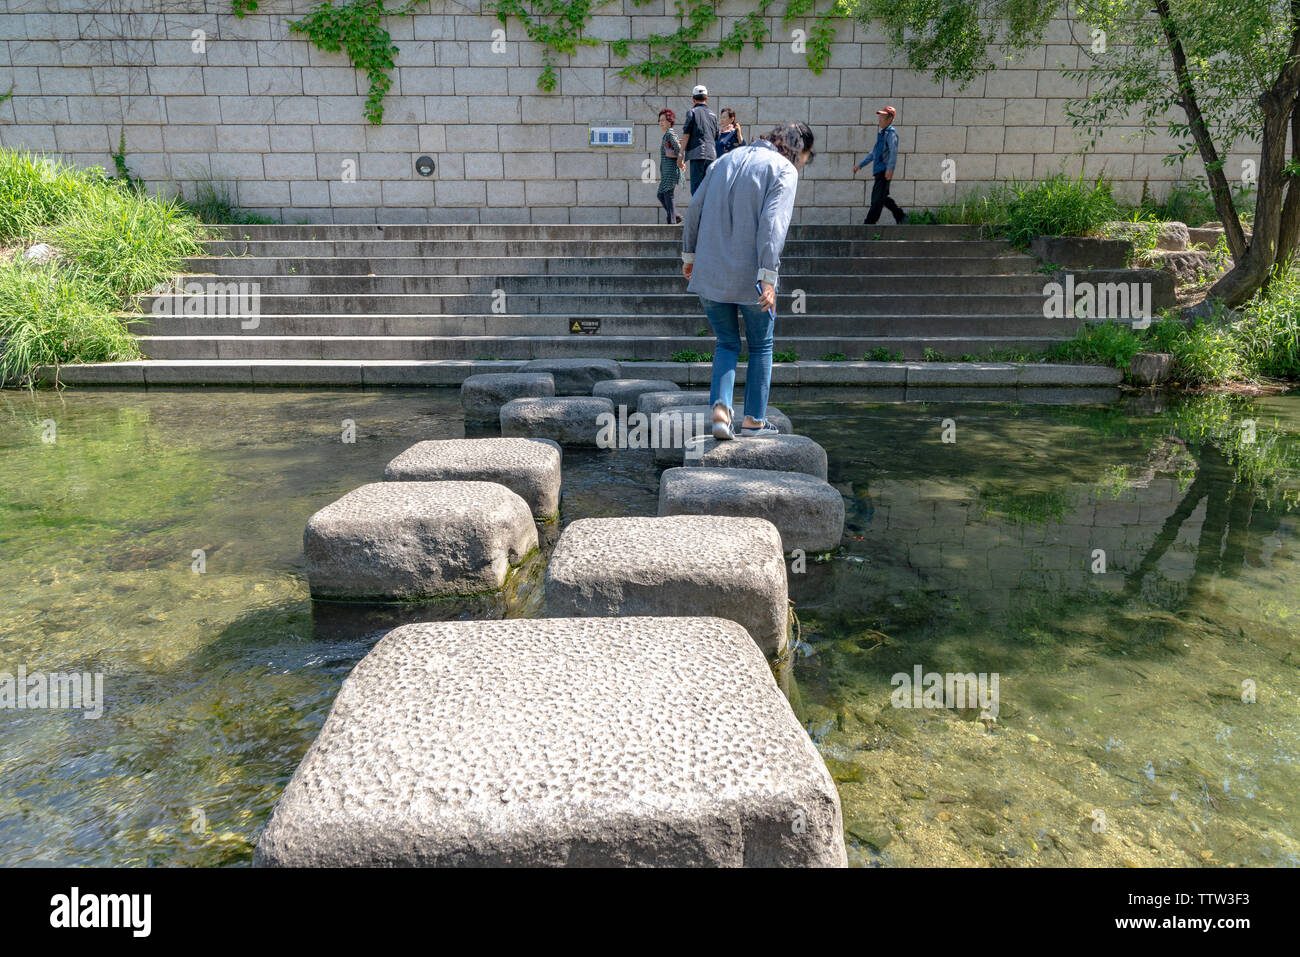 SEOUL, SOUTH KOREA - MAY 31, 2019: One woman is crossing the Cheonggyecheon stream, using stepping stones Stock Photo